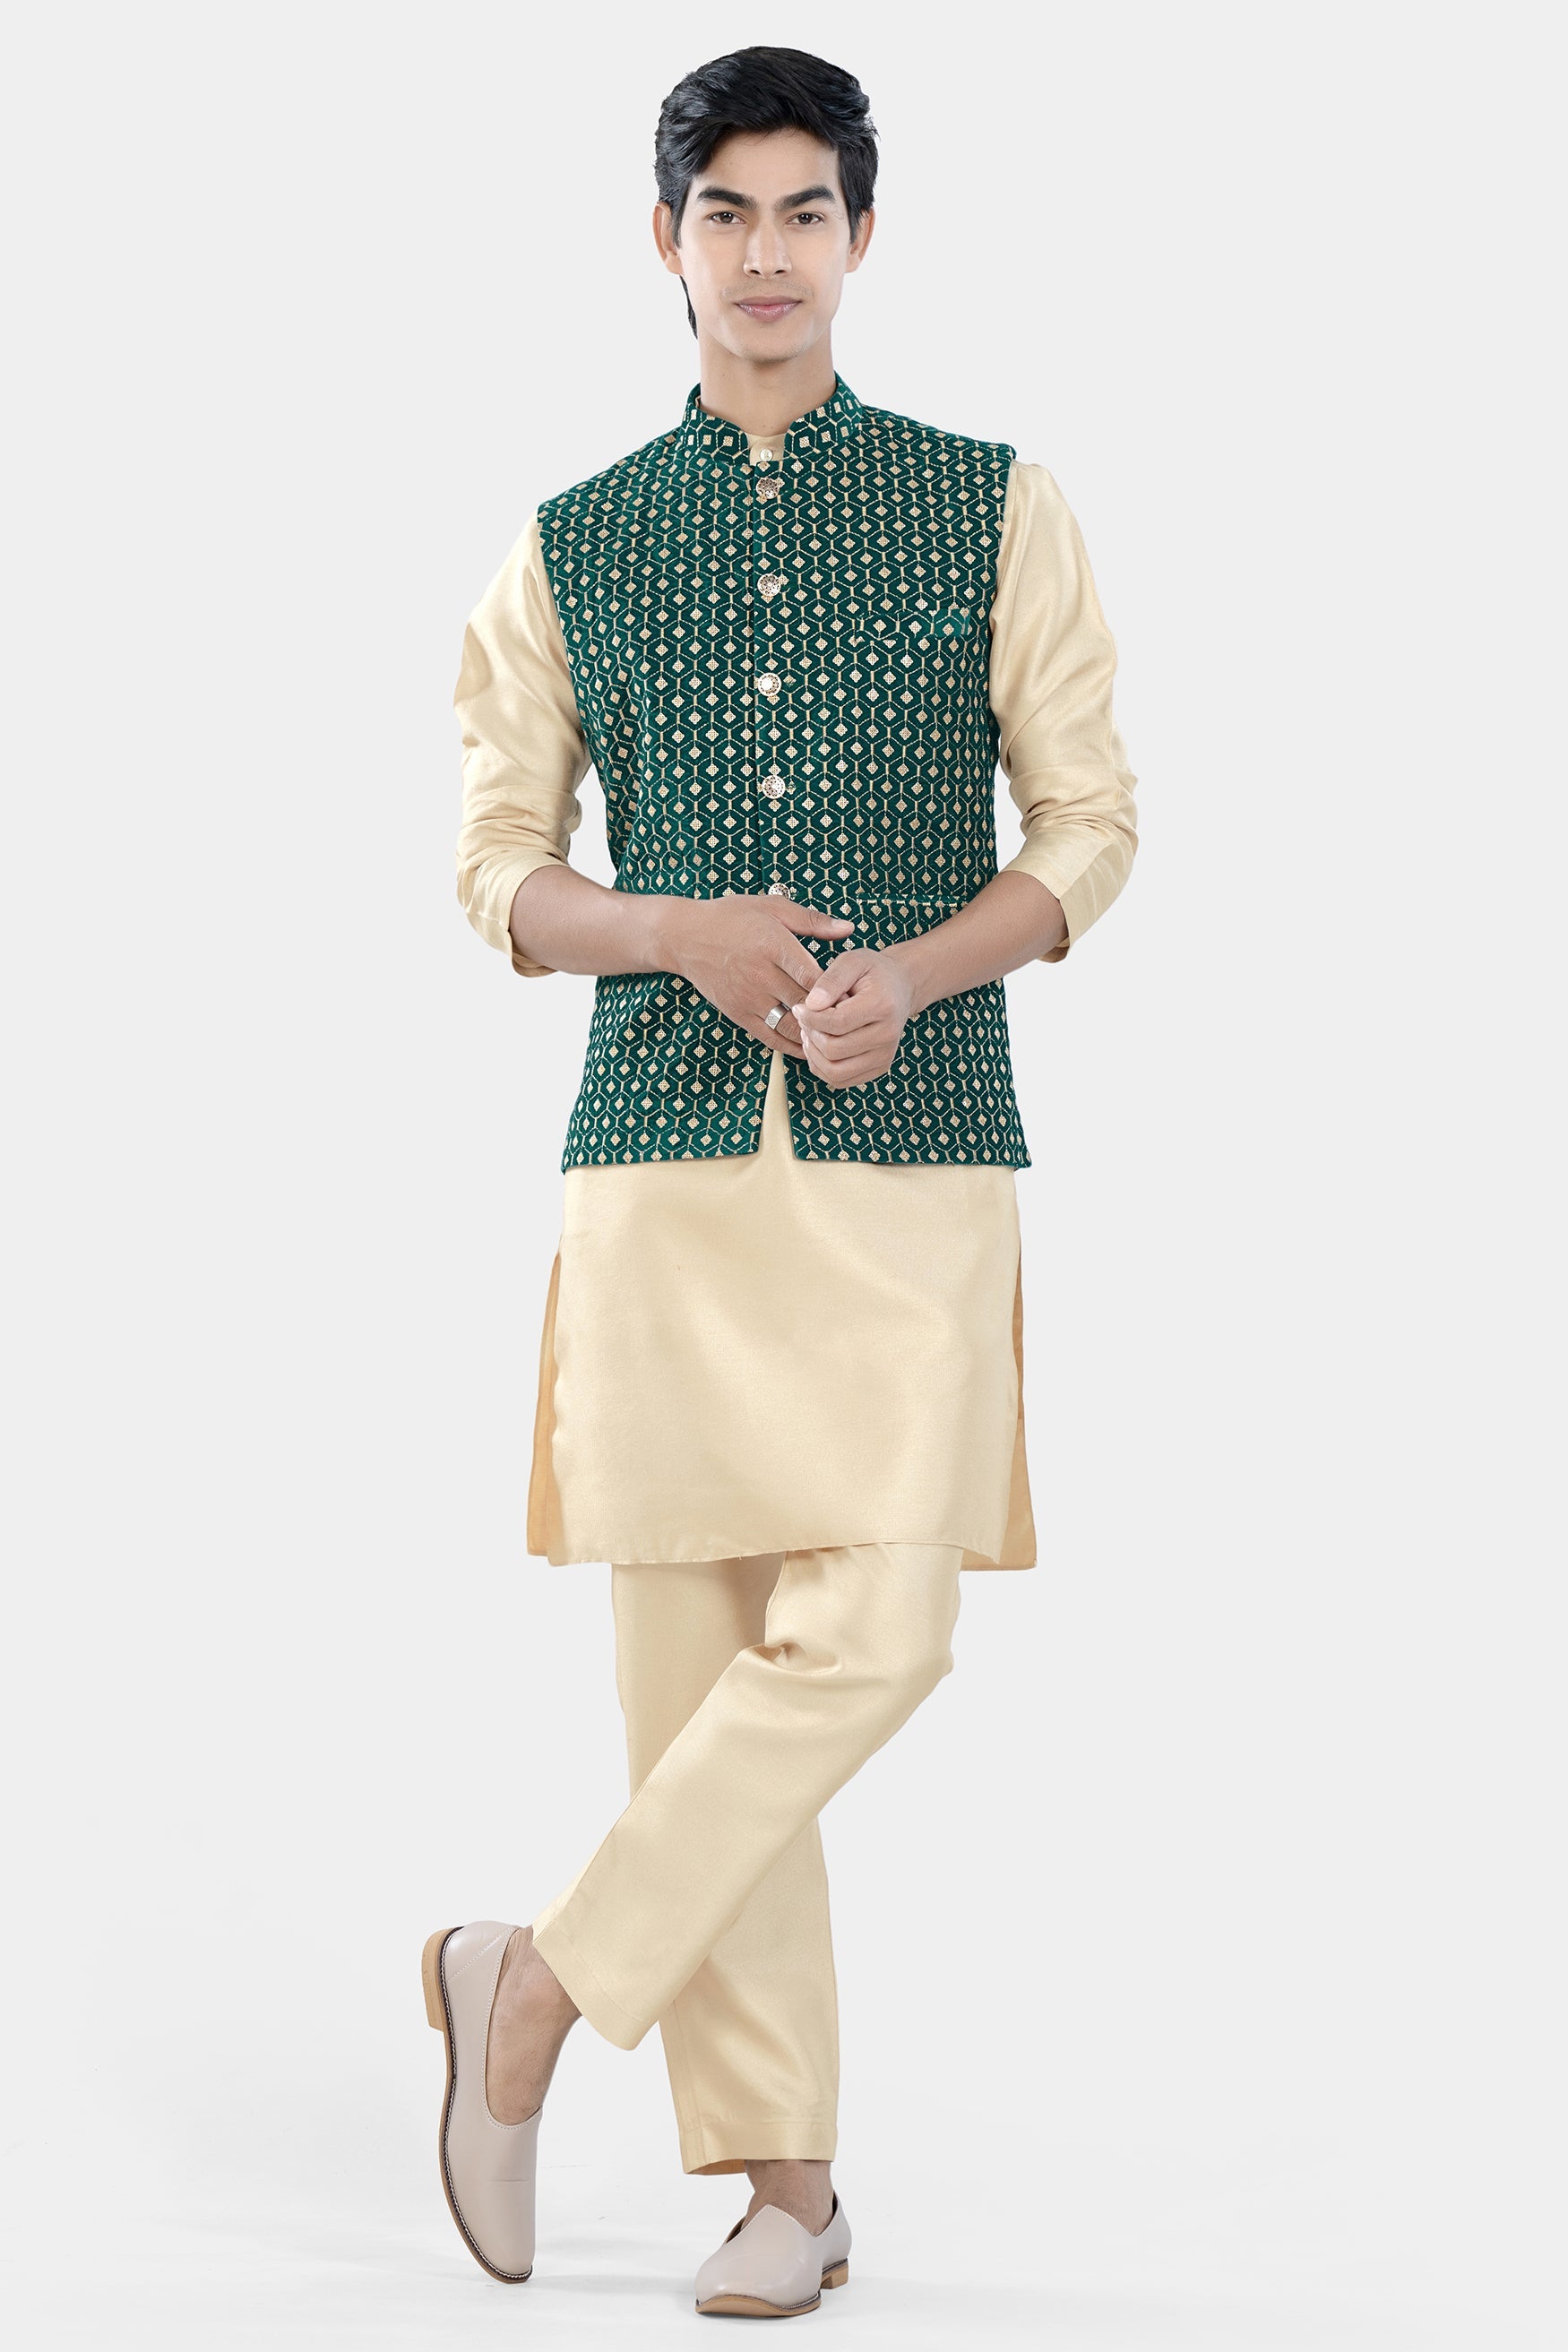 Almond Brown Kurta Set with Sherpa Green and Givry Cream Hexagon Sequin and Thread Embroidered Designer Nehru Jacket KPNJ005-44,  KPNJ005-46,  KPNJ005-48,  KPNJ005-50,  KPNJ005-52,  KPNJ005-54,  KPNJ005-56,  KPNJ005-58,  KPNJ005-60